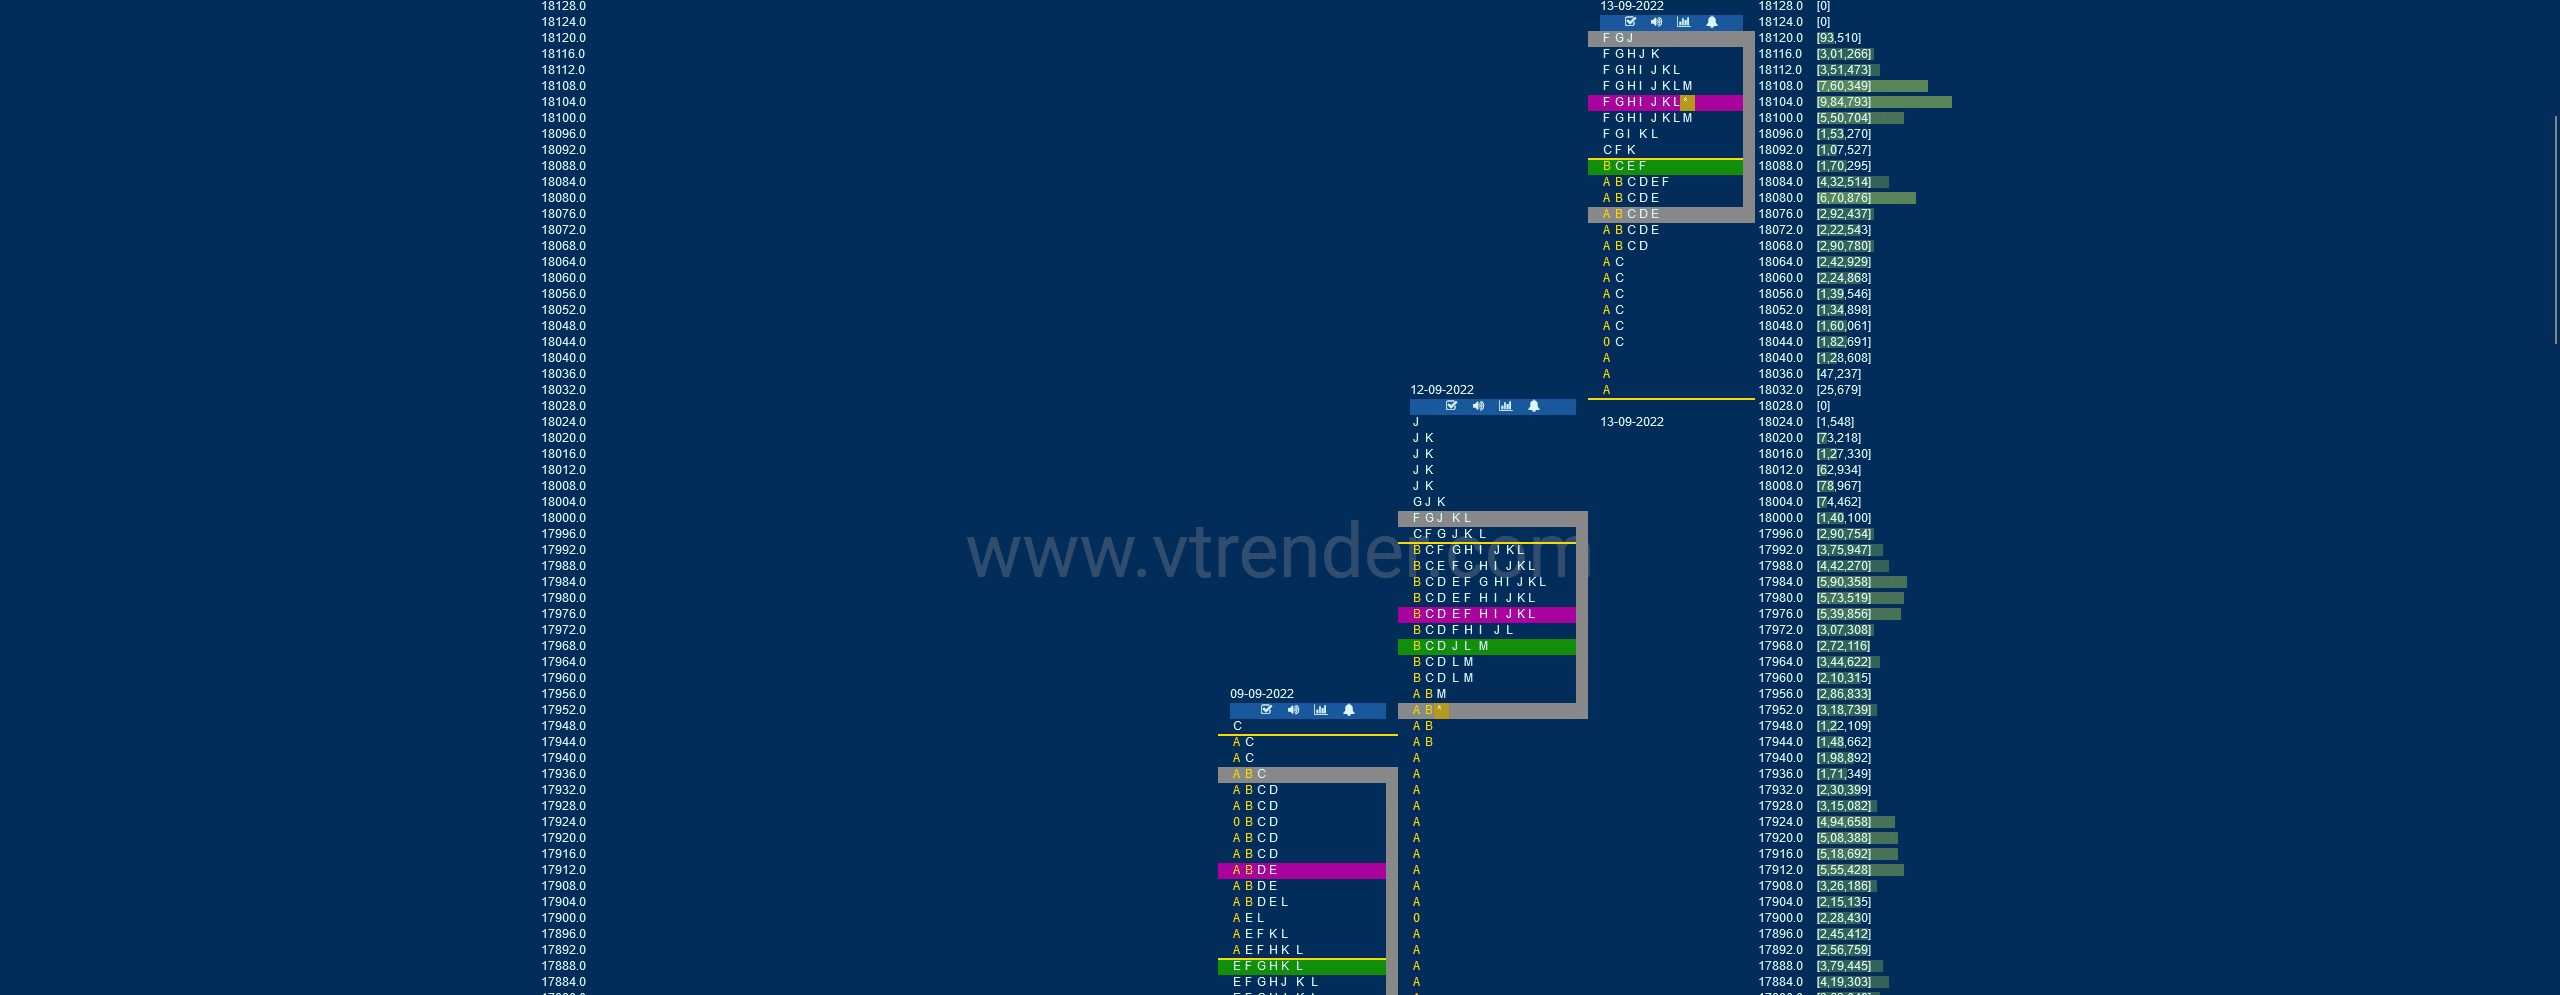 Nf 8 Market Profile Analysis Dated 13Th Sep 2022 Banknifty Futures, Charts, Day Trading, Intraday Trading, Intraday Trading Strategies, Market Profile, Market Profile Trading Strategies, Nifty Futures, Order Flow Analysis, Support And Resistance, Technical Analysis, Trading Strategies, Volume Profile Trading